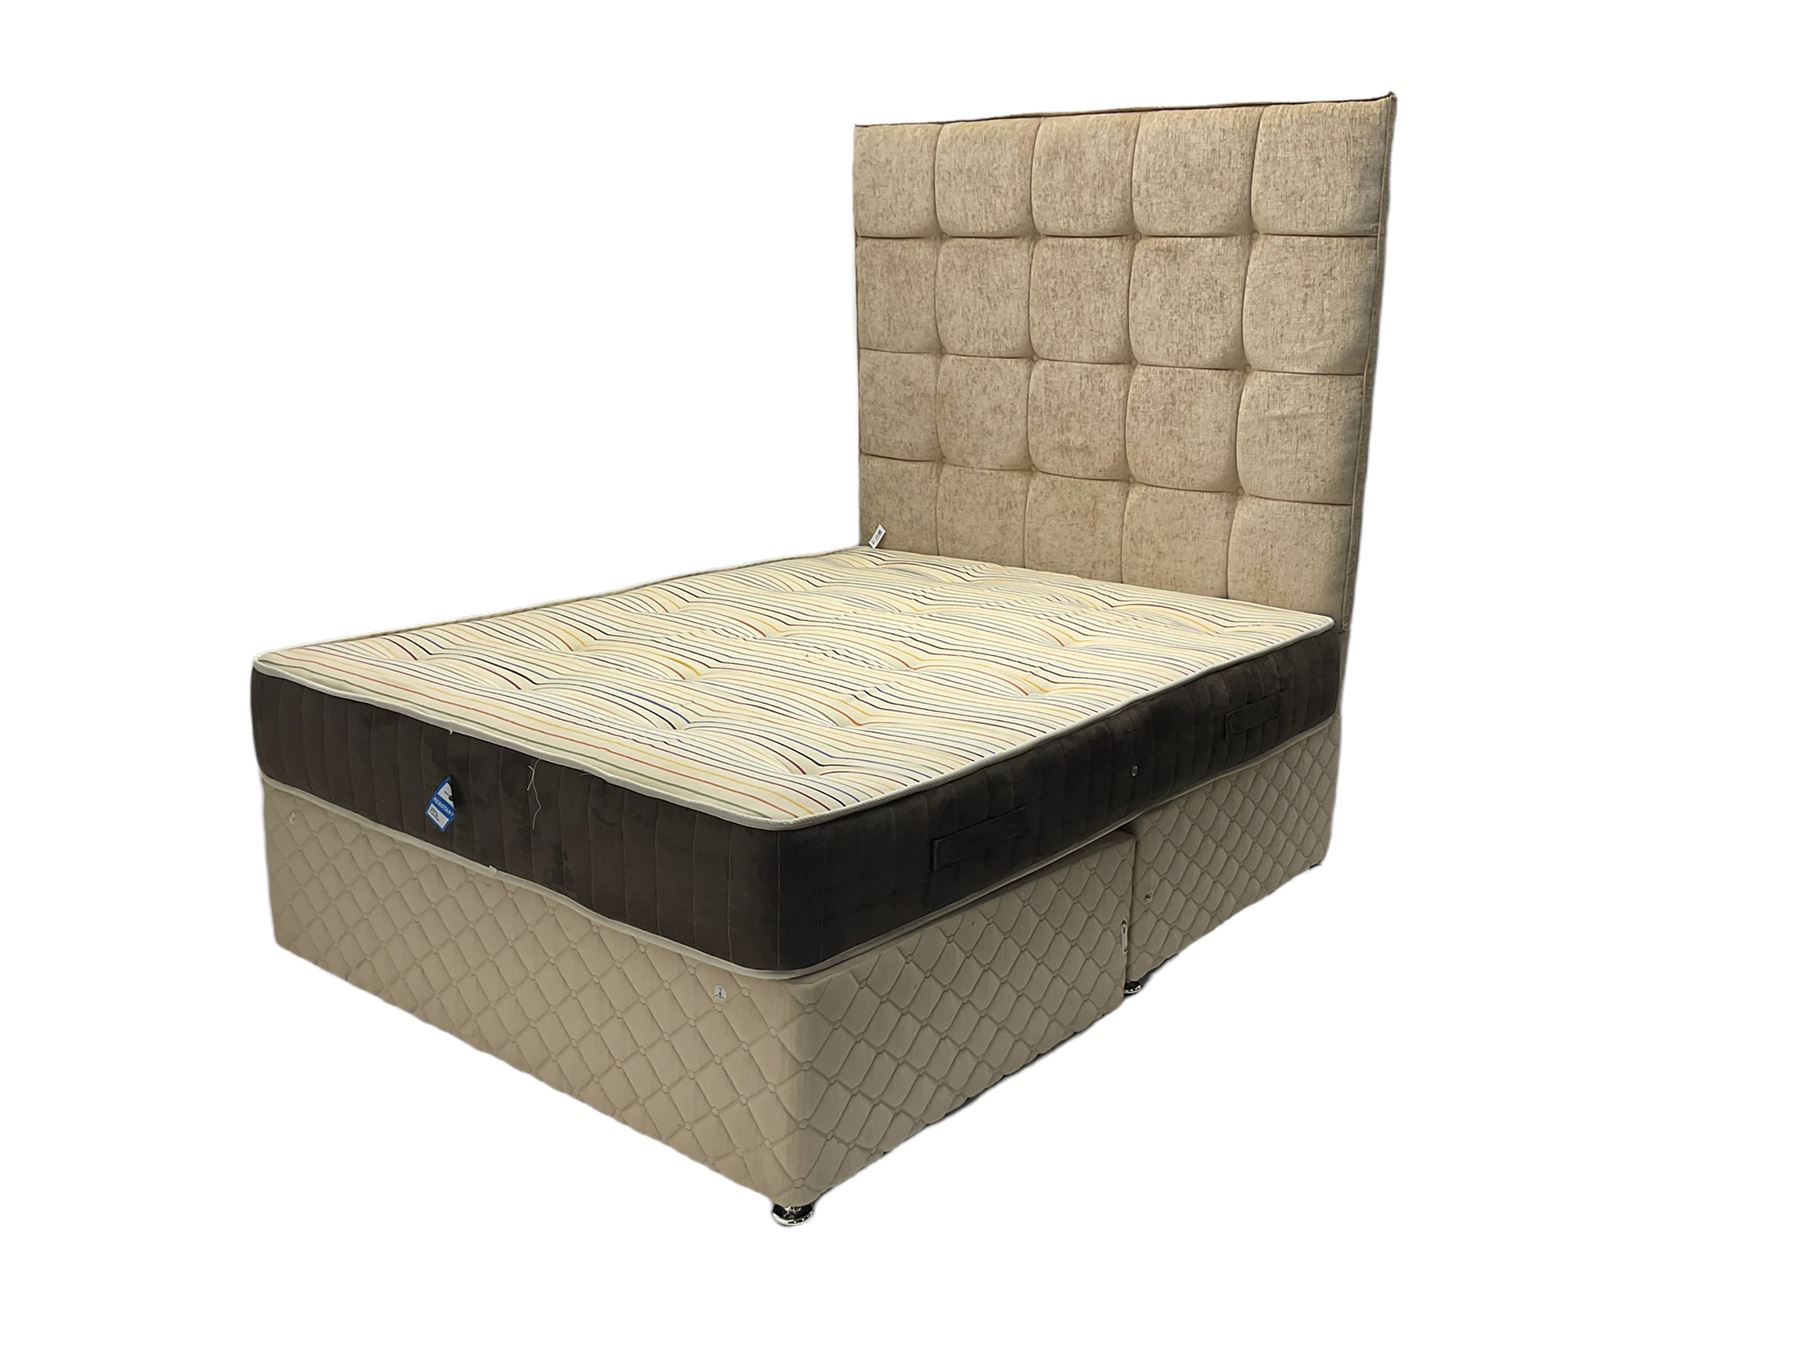 5' Kingsize divan bed with mattress and headboard - Image 2 of 4